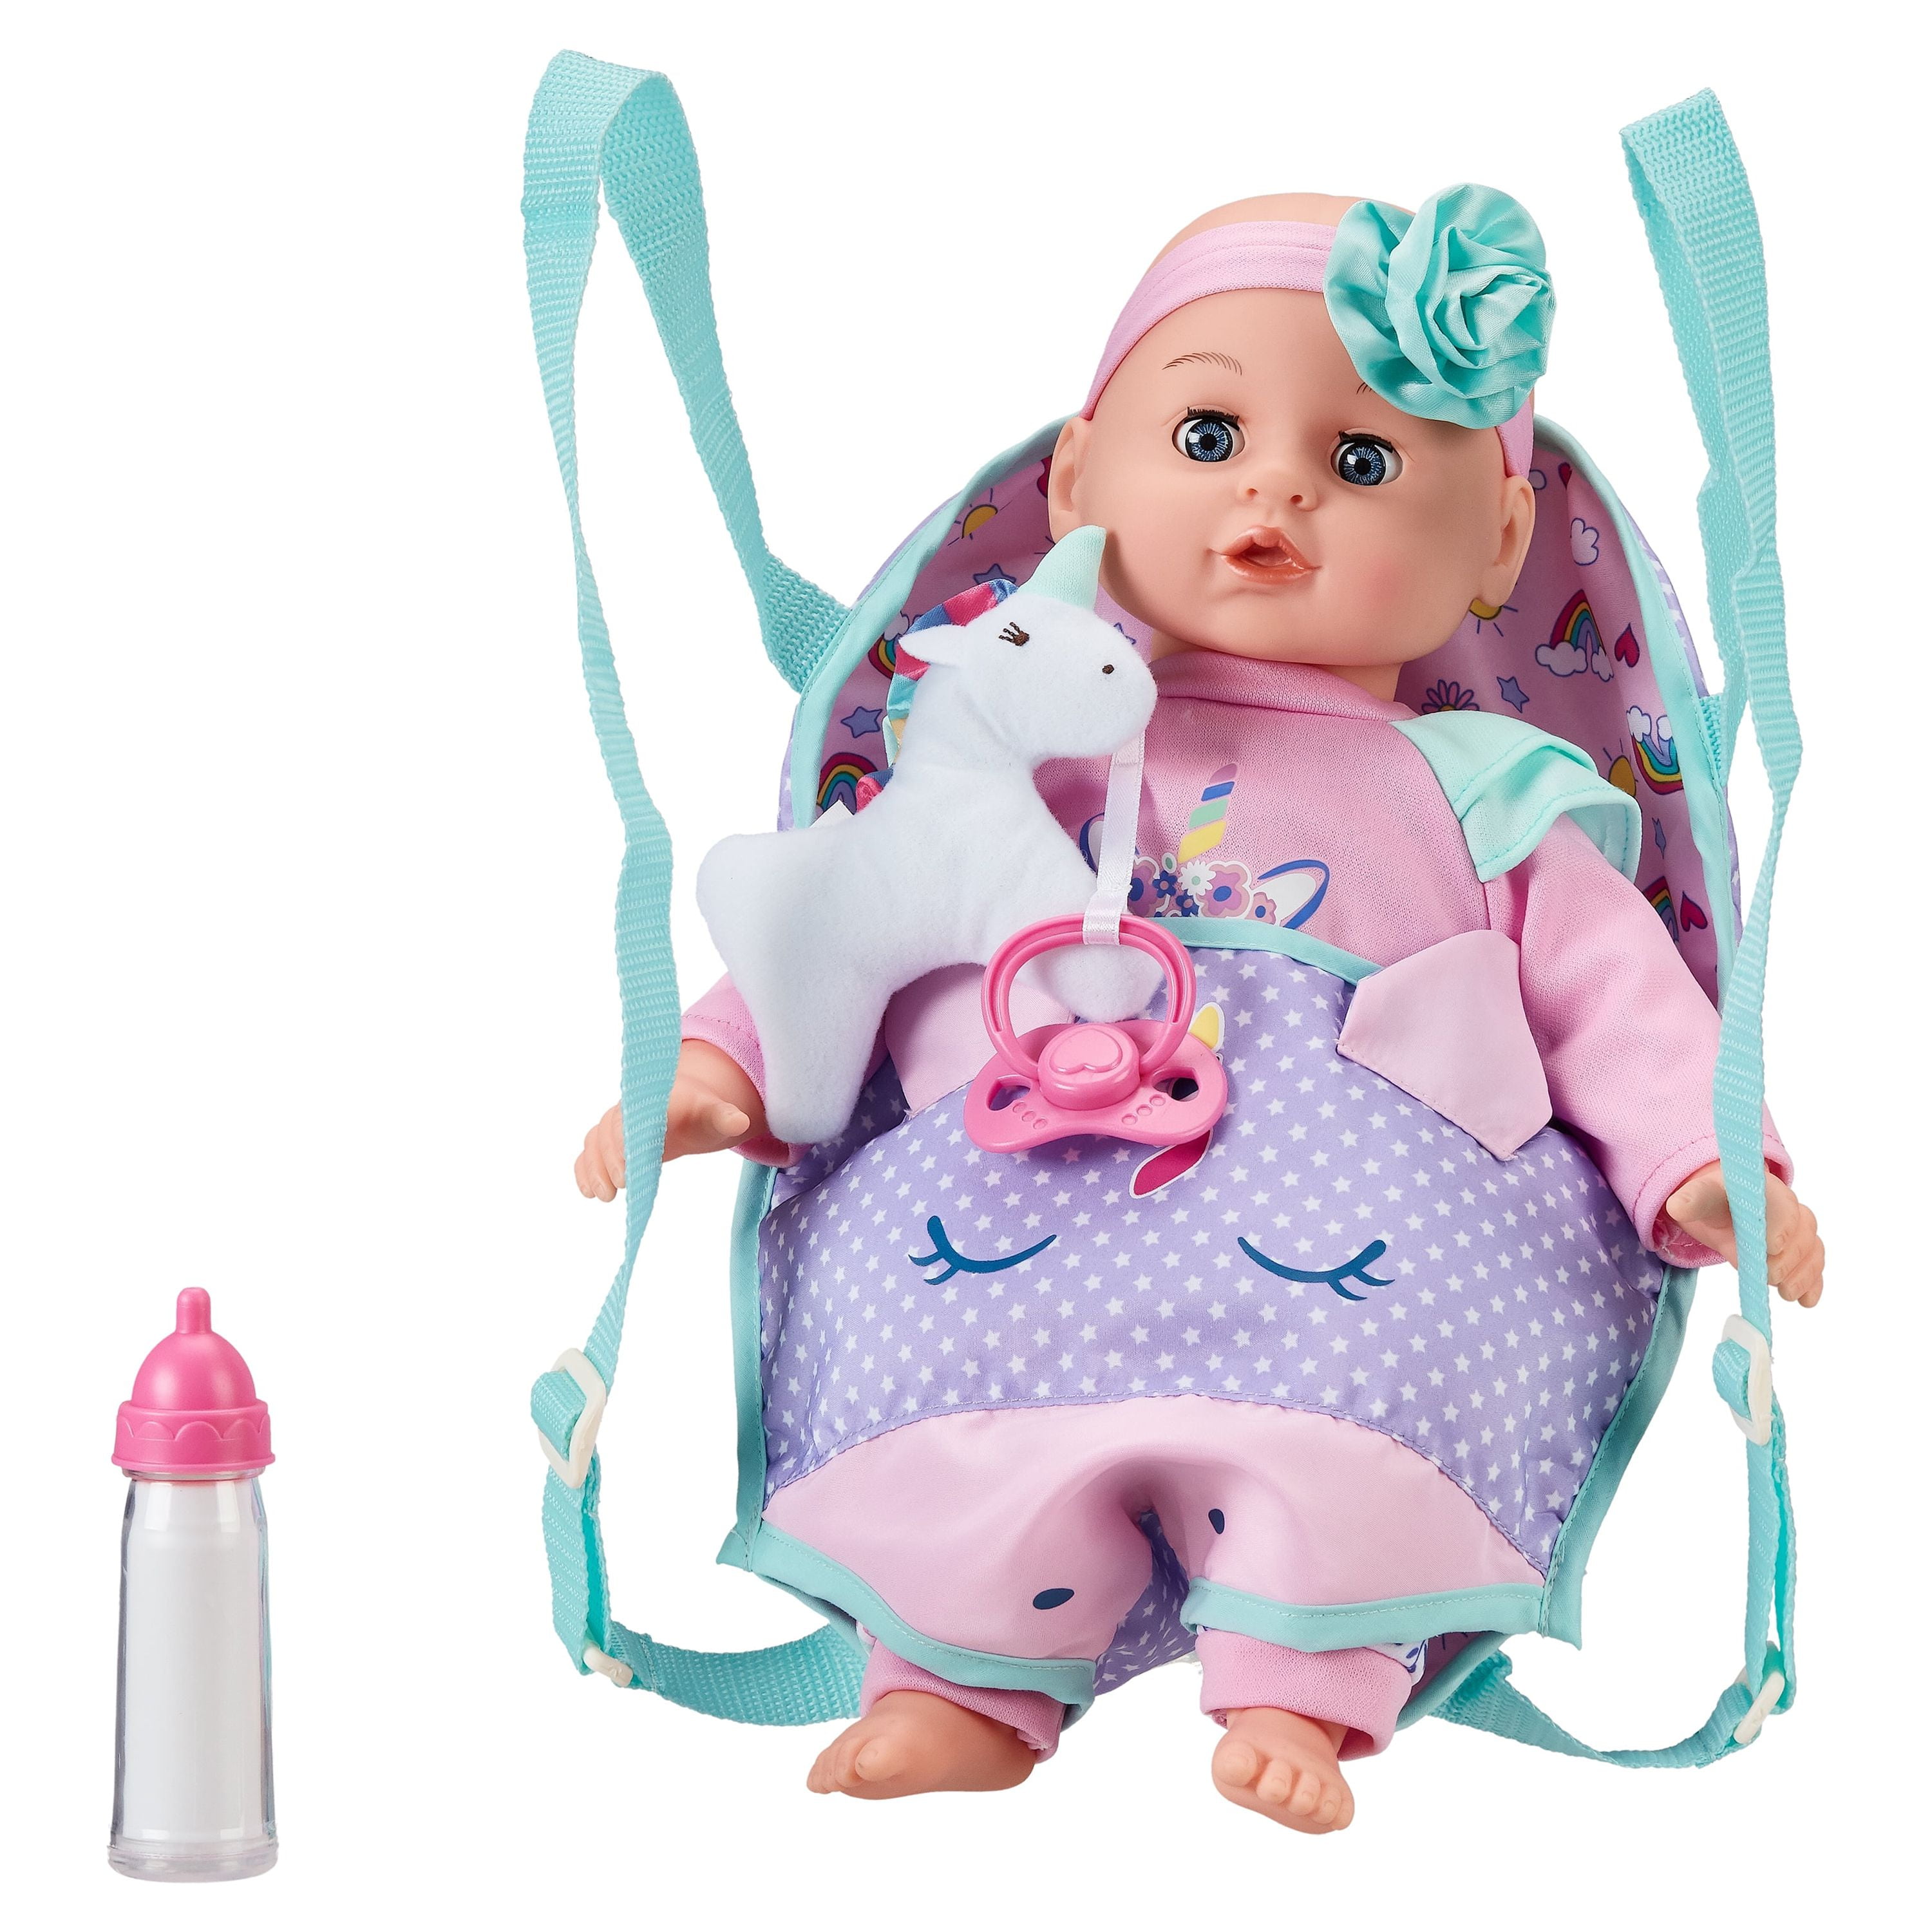  Mini Baby Doll Set, Small Baby Doll Playset with Mini Doll  Accessories & 5 inch Doll Furniture, Mini Dolls for Girls, Small Dolls for  Girls, Mini Baby Dolls Toy Play Pack